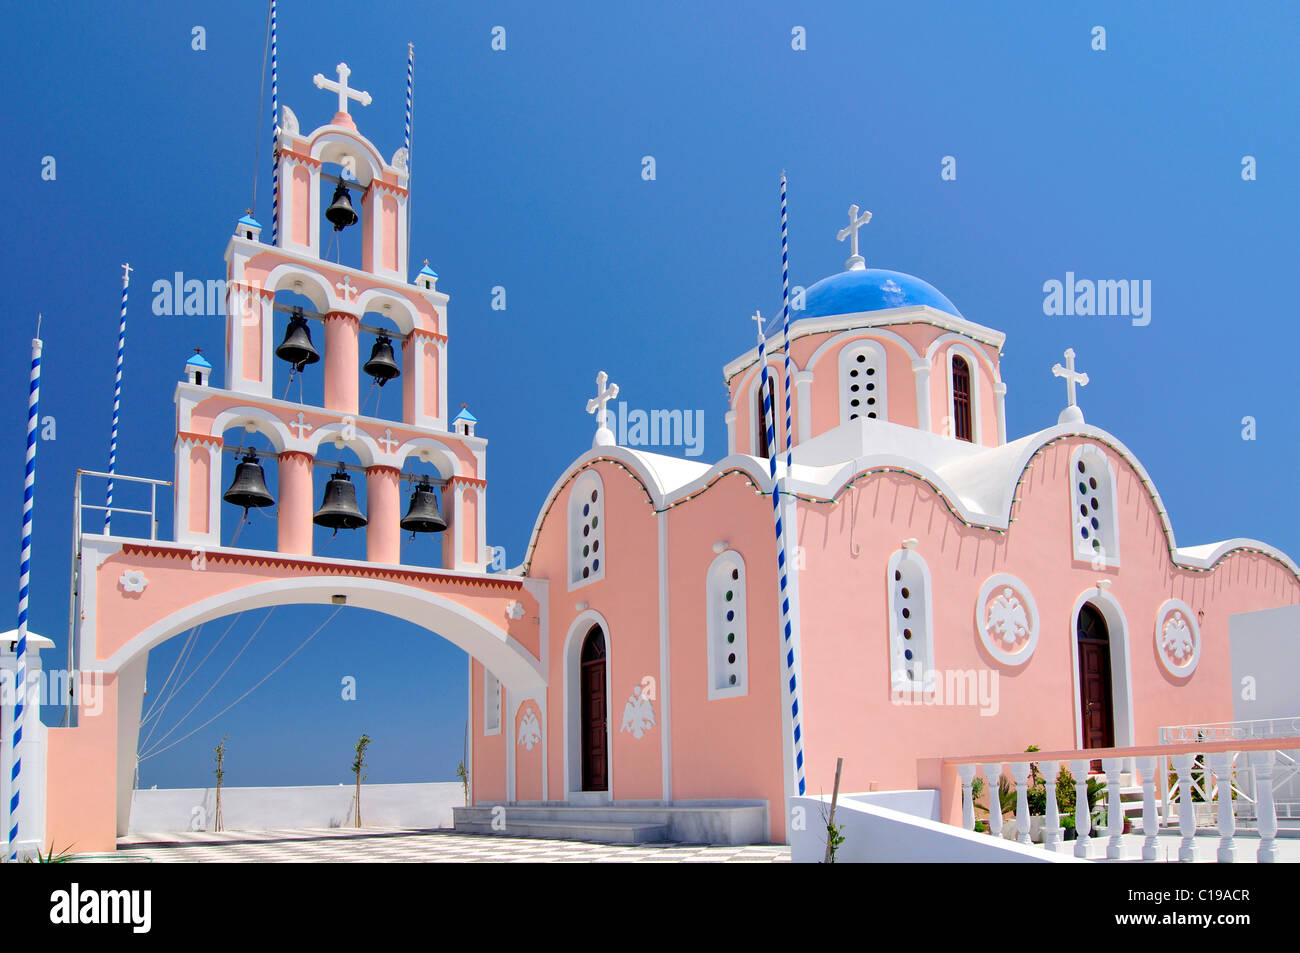 Bell tower with six bells and a pink and light blue Greek church Karterados, Santorini, Cyclades, Greece, Europe Stock Photo